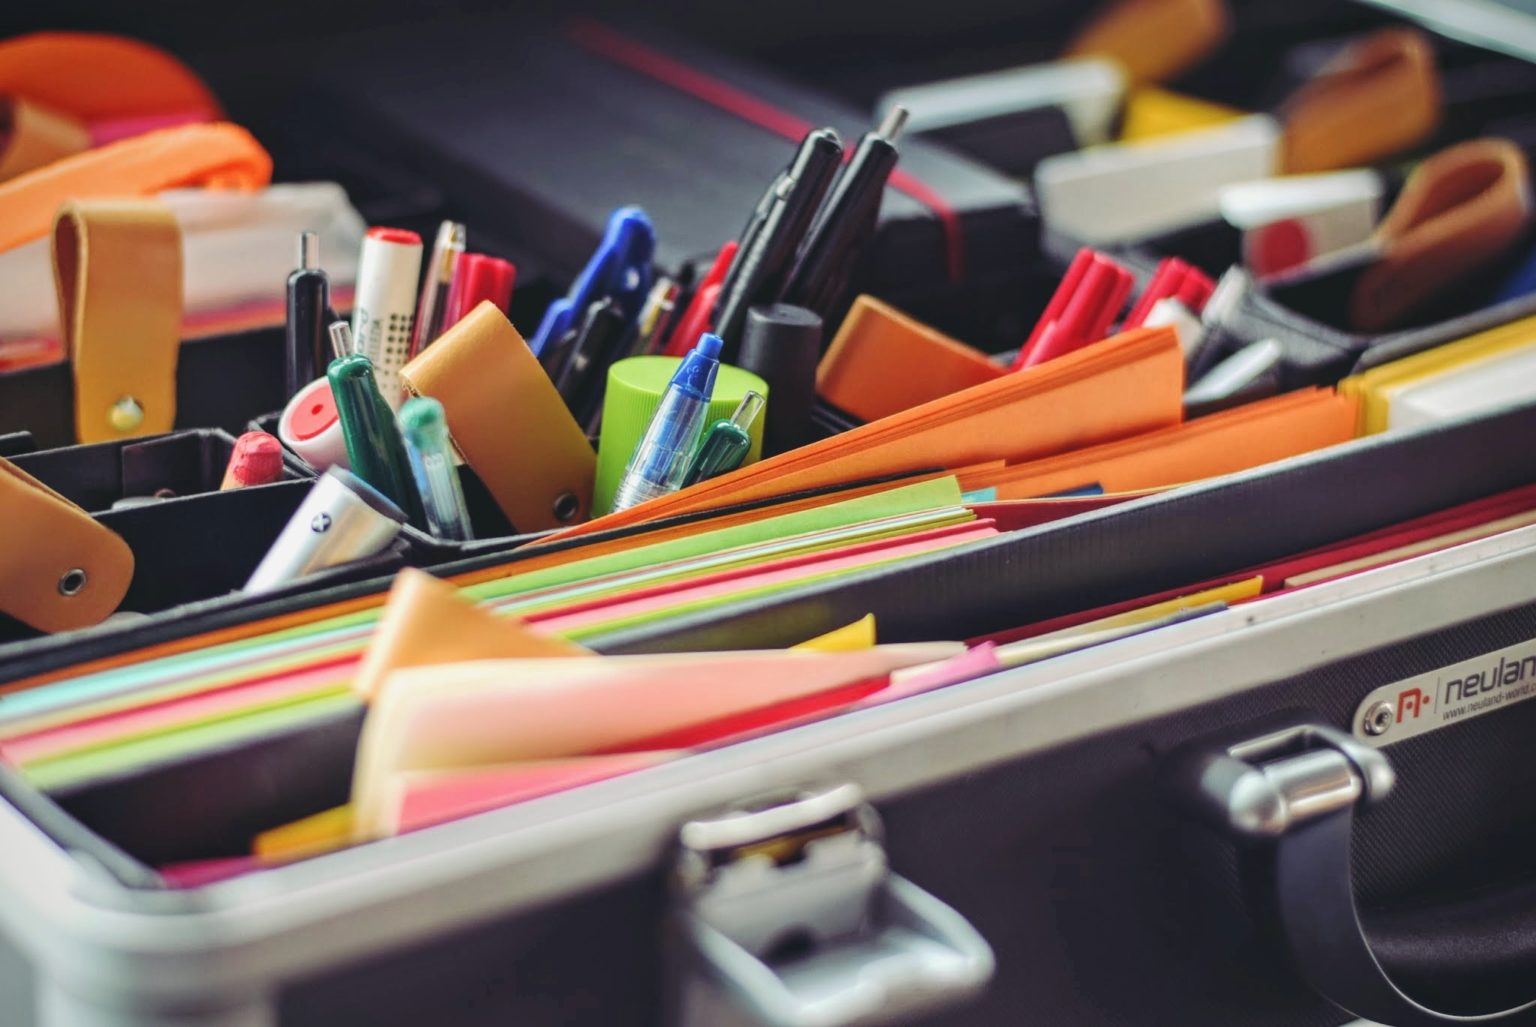 Office supplies packed into an organizer